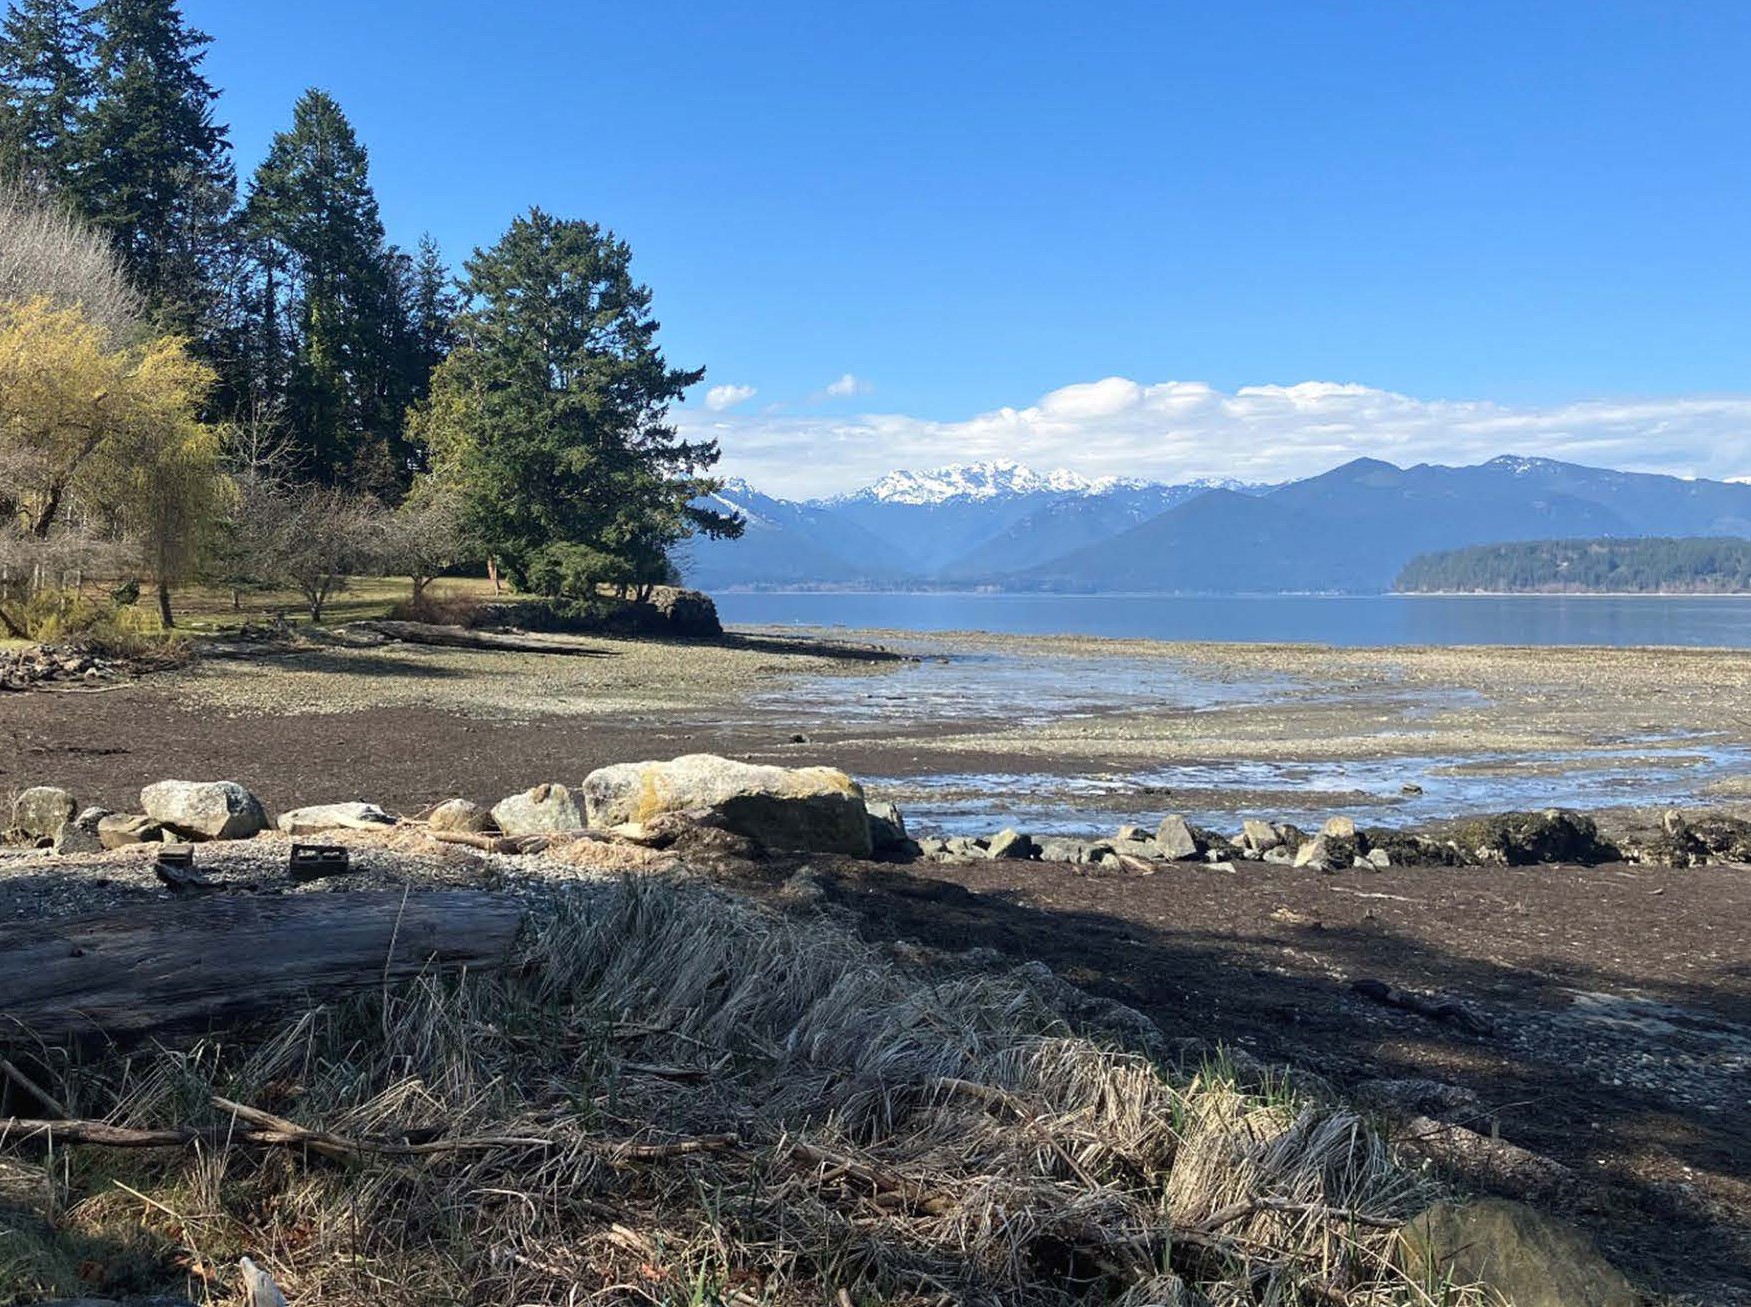 Rocky shoreline and estuary with snowy peaks of the Olympic Mountains in the background.